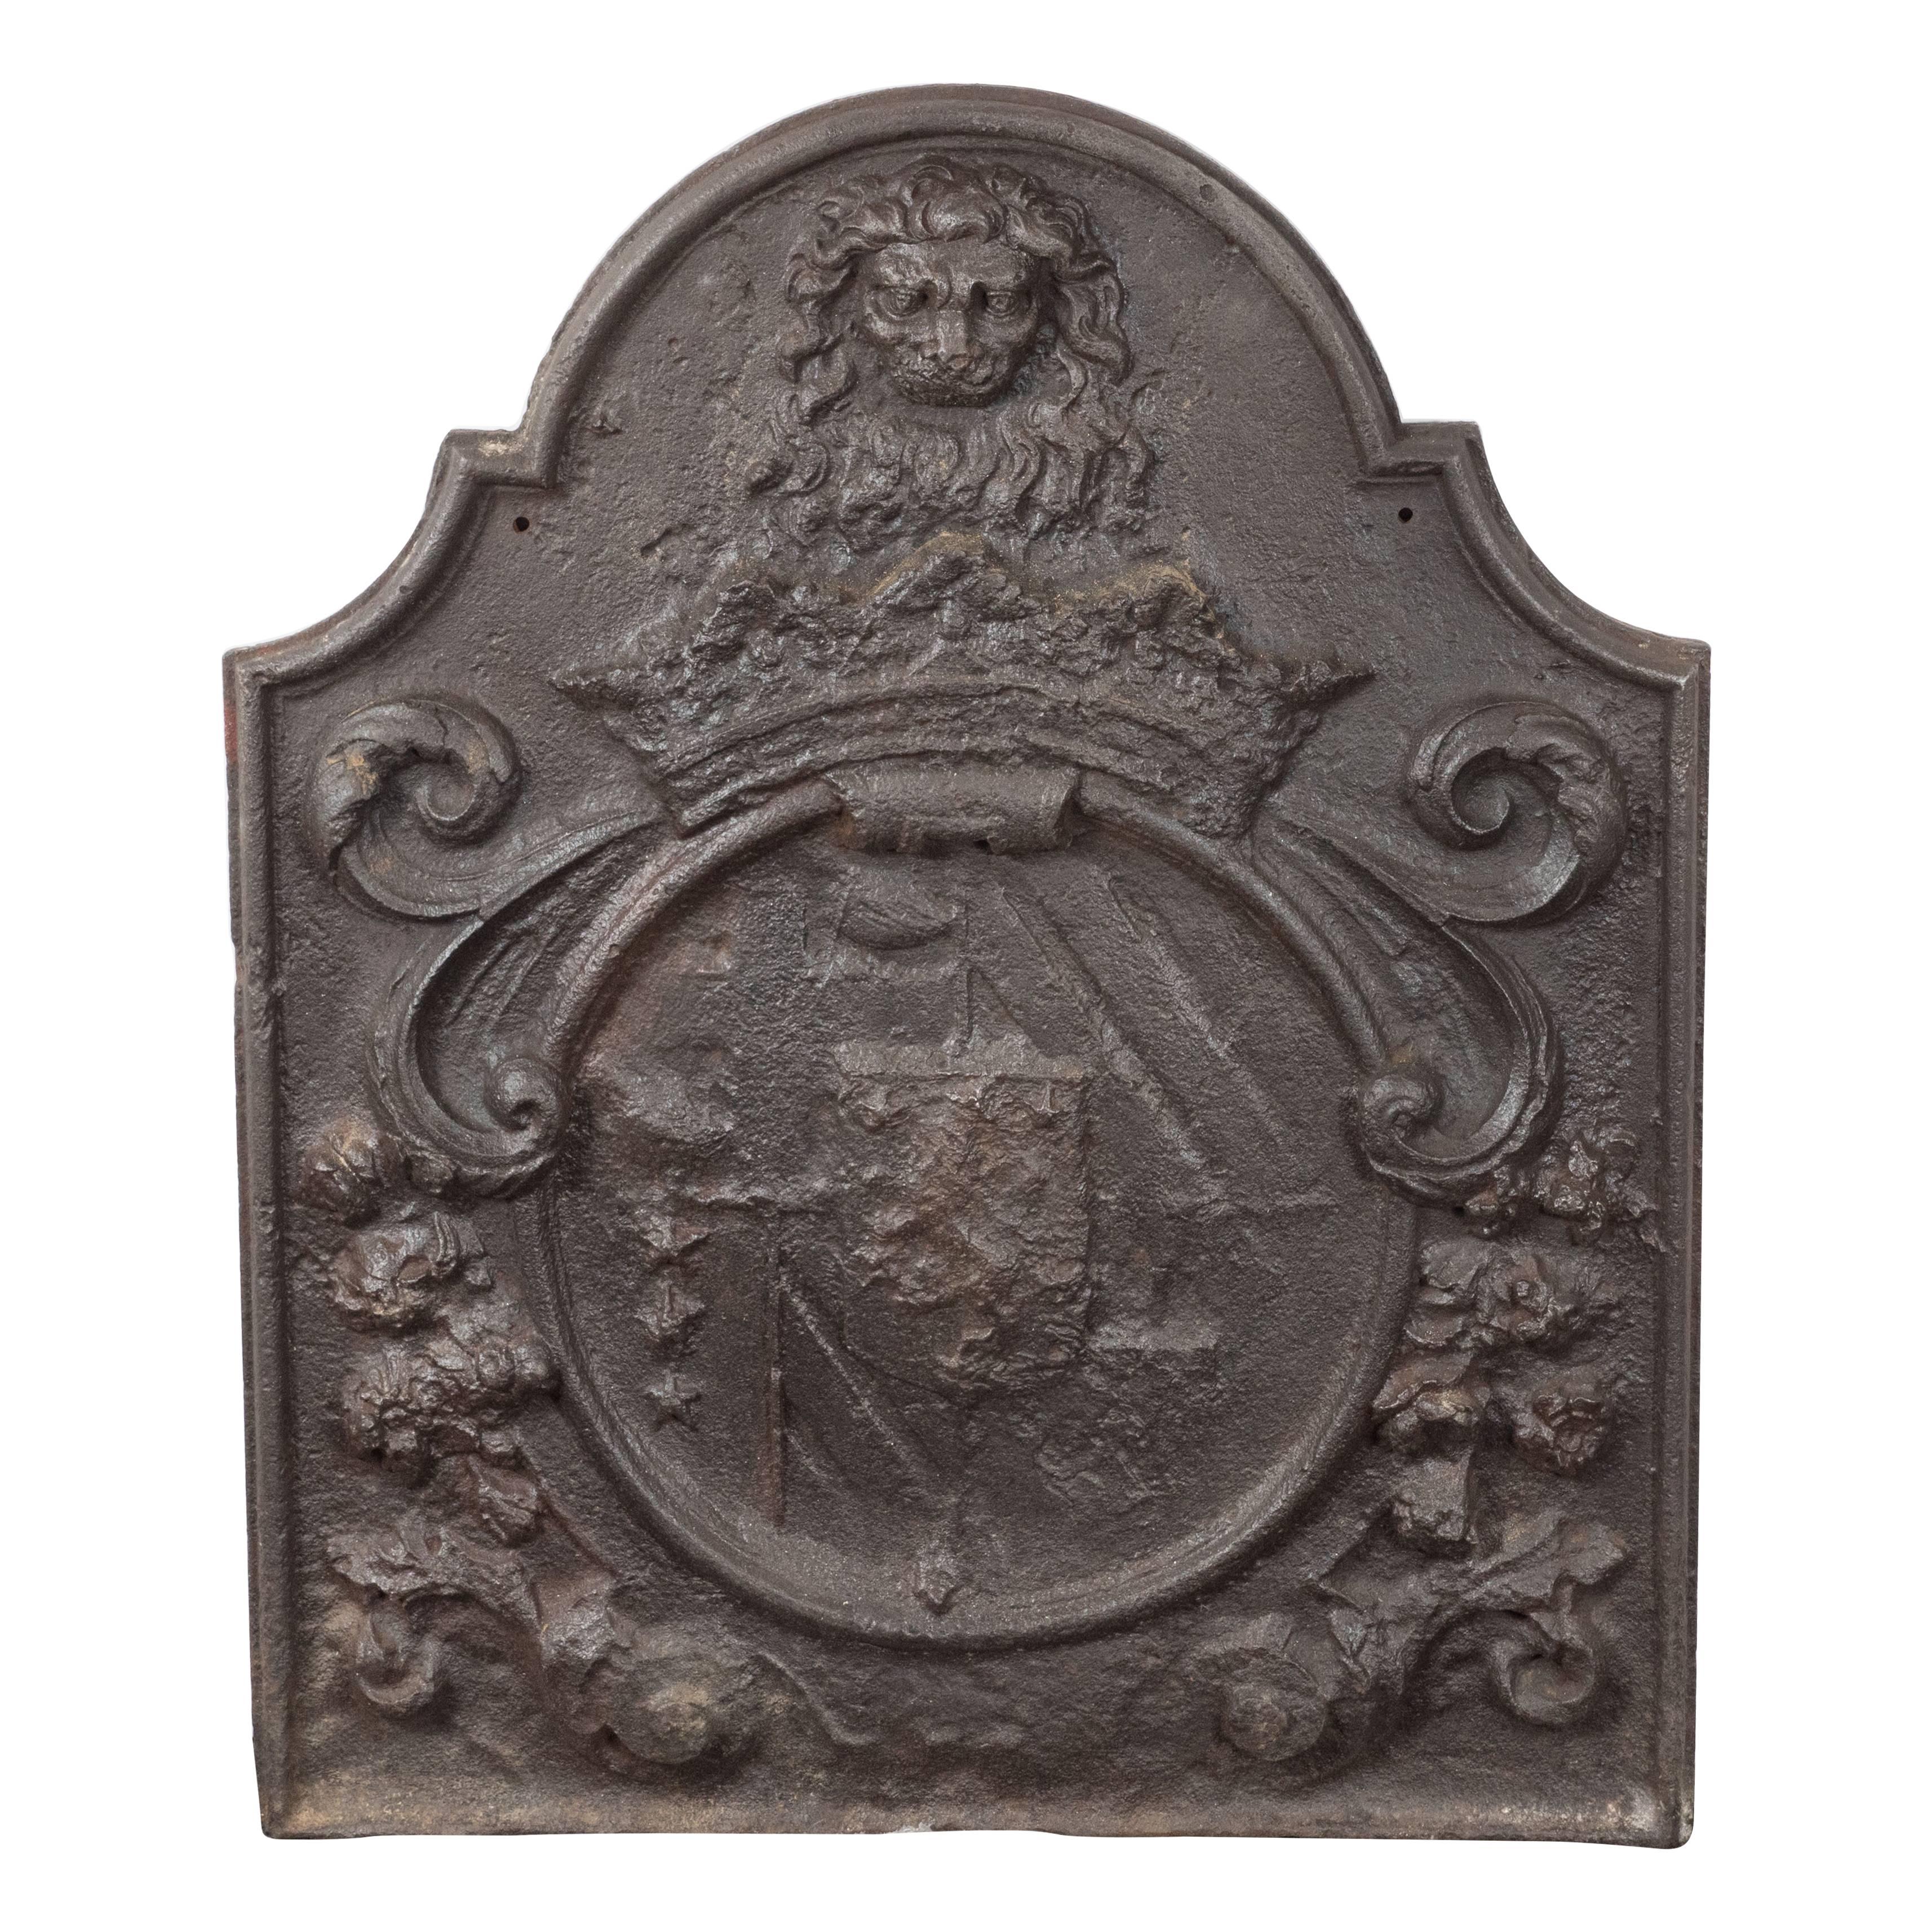 Dutch Armorial Fireback with Lion's Head Motif and Crest on Arch Top Panel